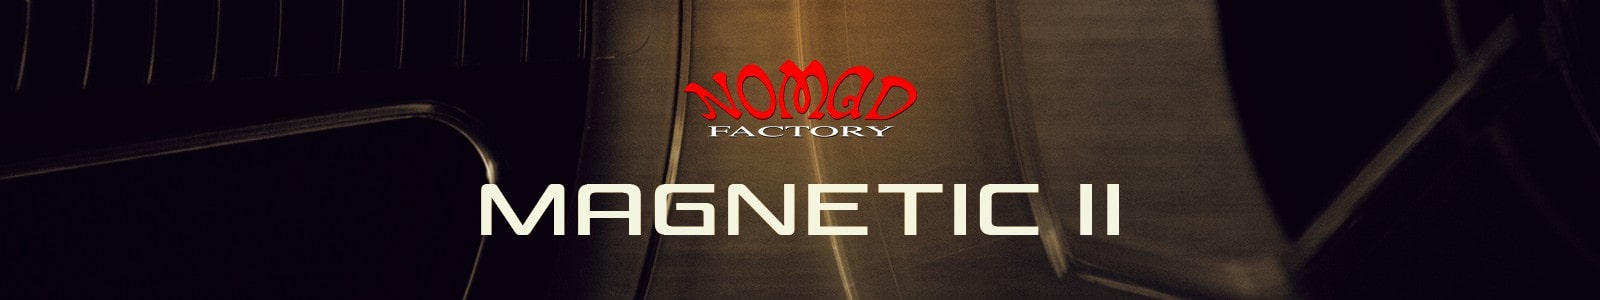 Nomad Factory Magnetic II